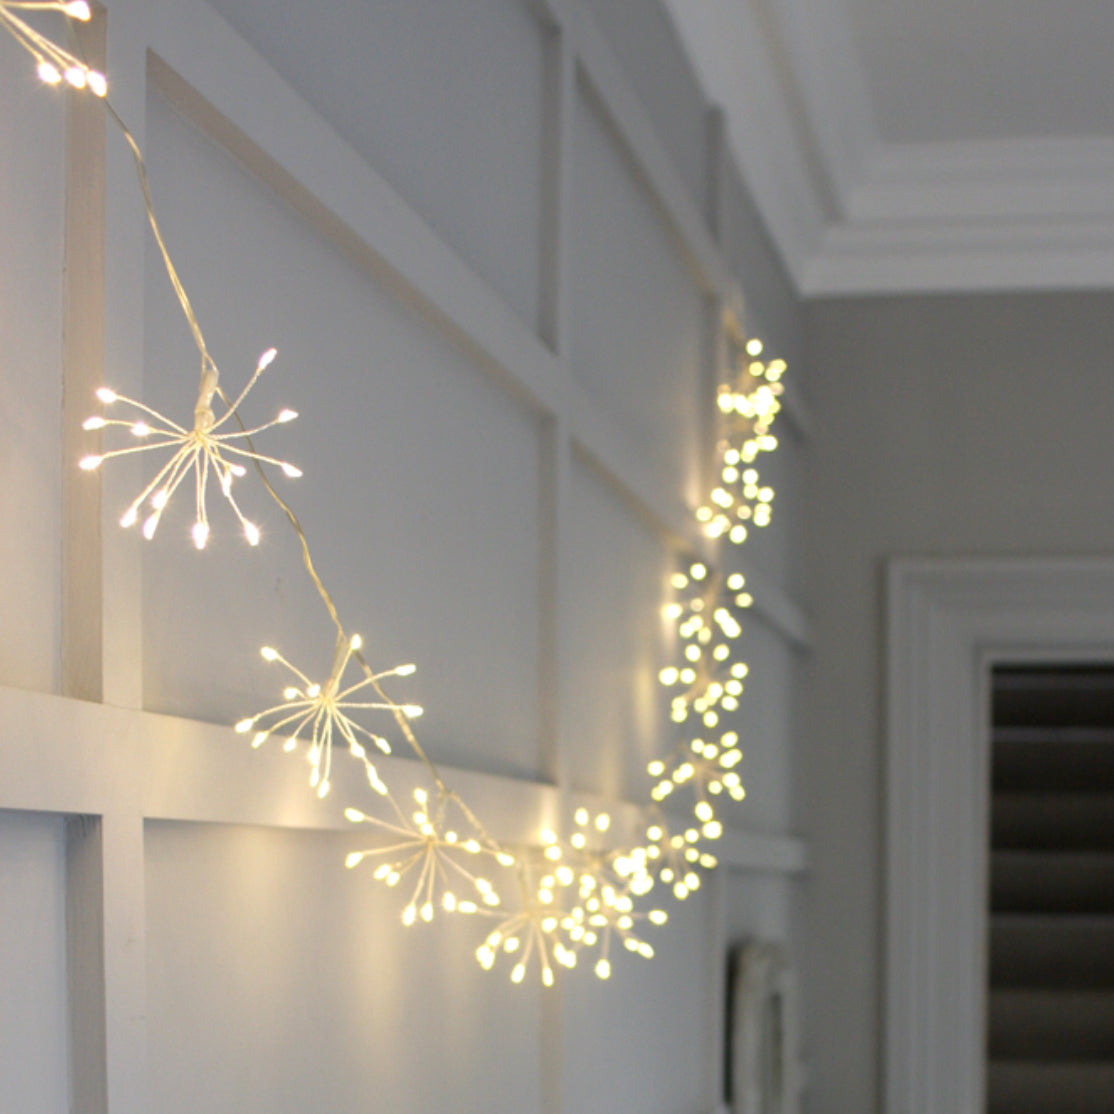 Chain of Silver Starburst LED Fairy Lights on Wall